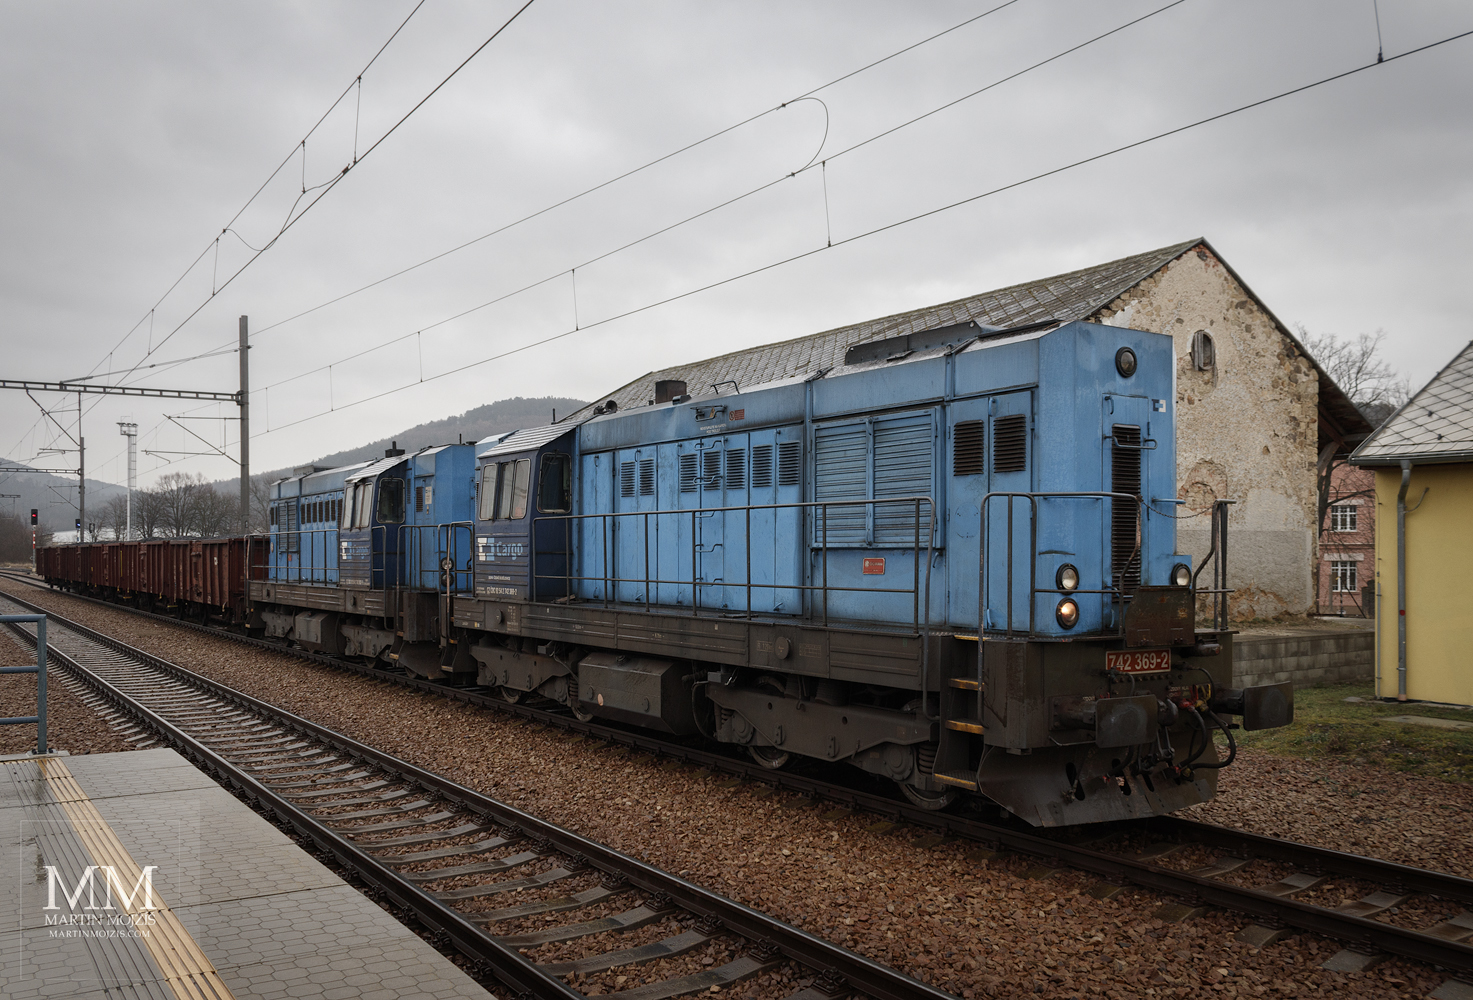 The pair of blue locomotives called Cats by CD Cargo. Zdice station in new.